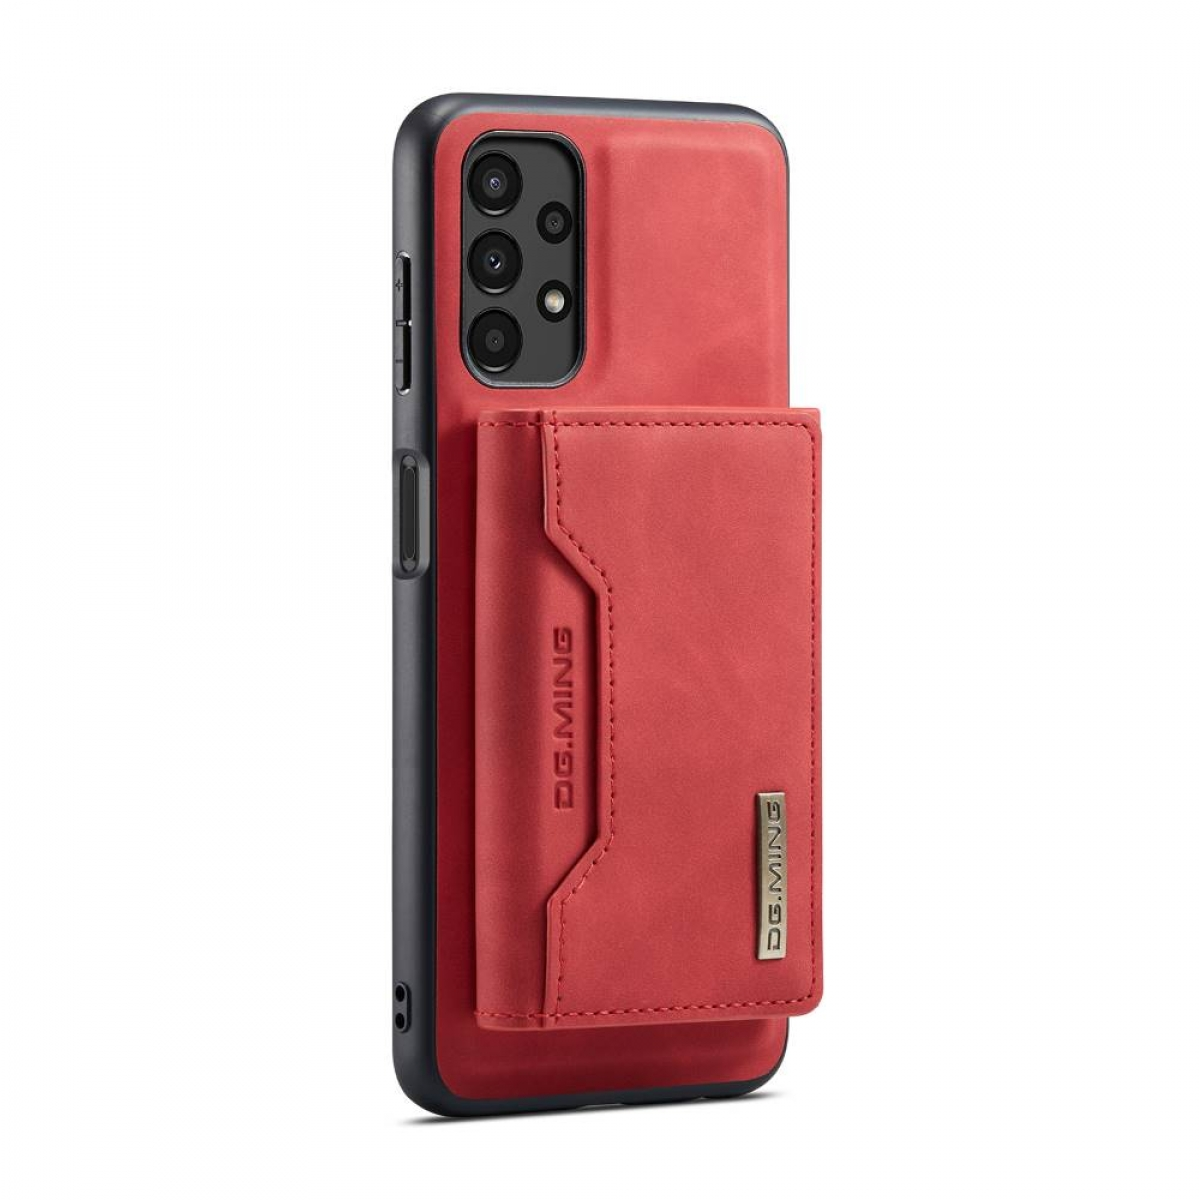 MING A13 Backcover, Rot Galaxy DG 2in1, 4G, M2 Samsung,